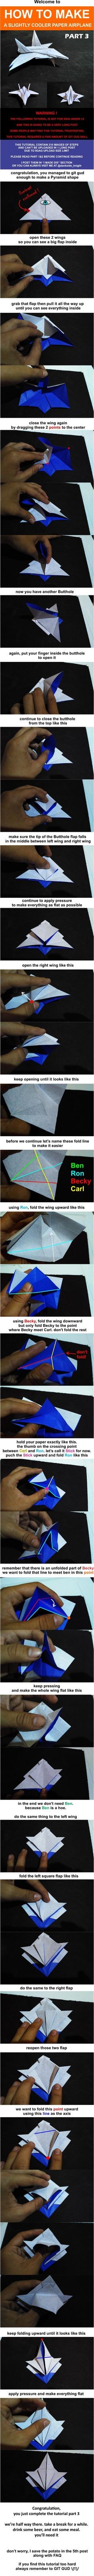 Nicky P Papercraft 21 Best Paper Plane Images On Pinterest